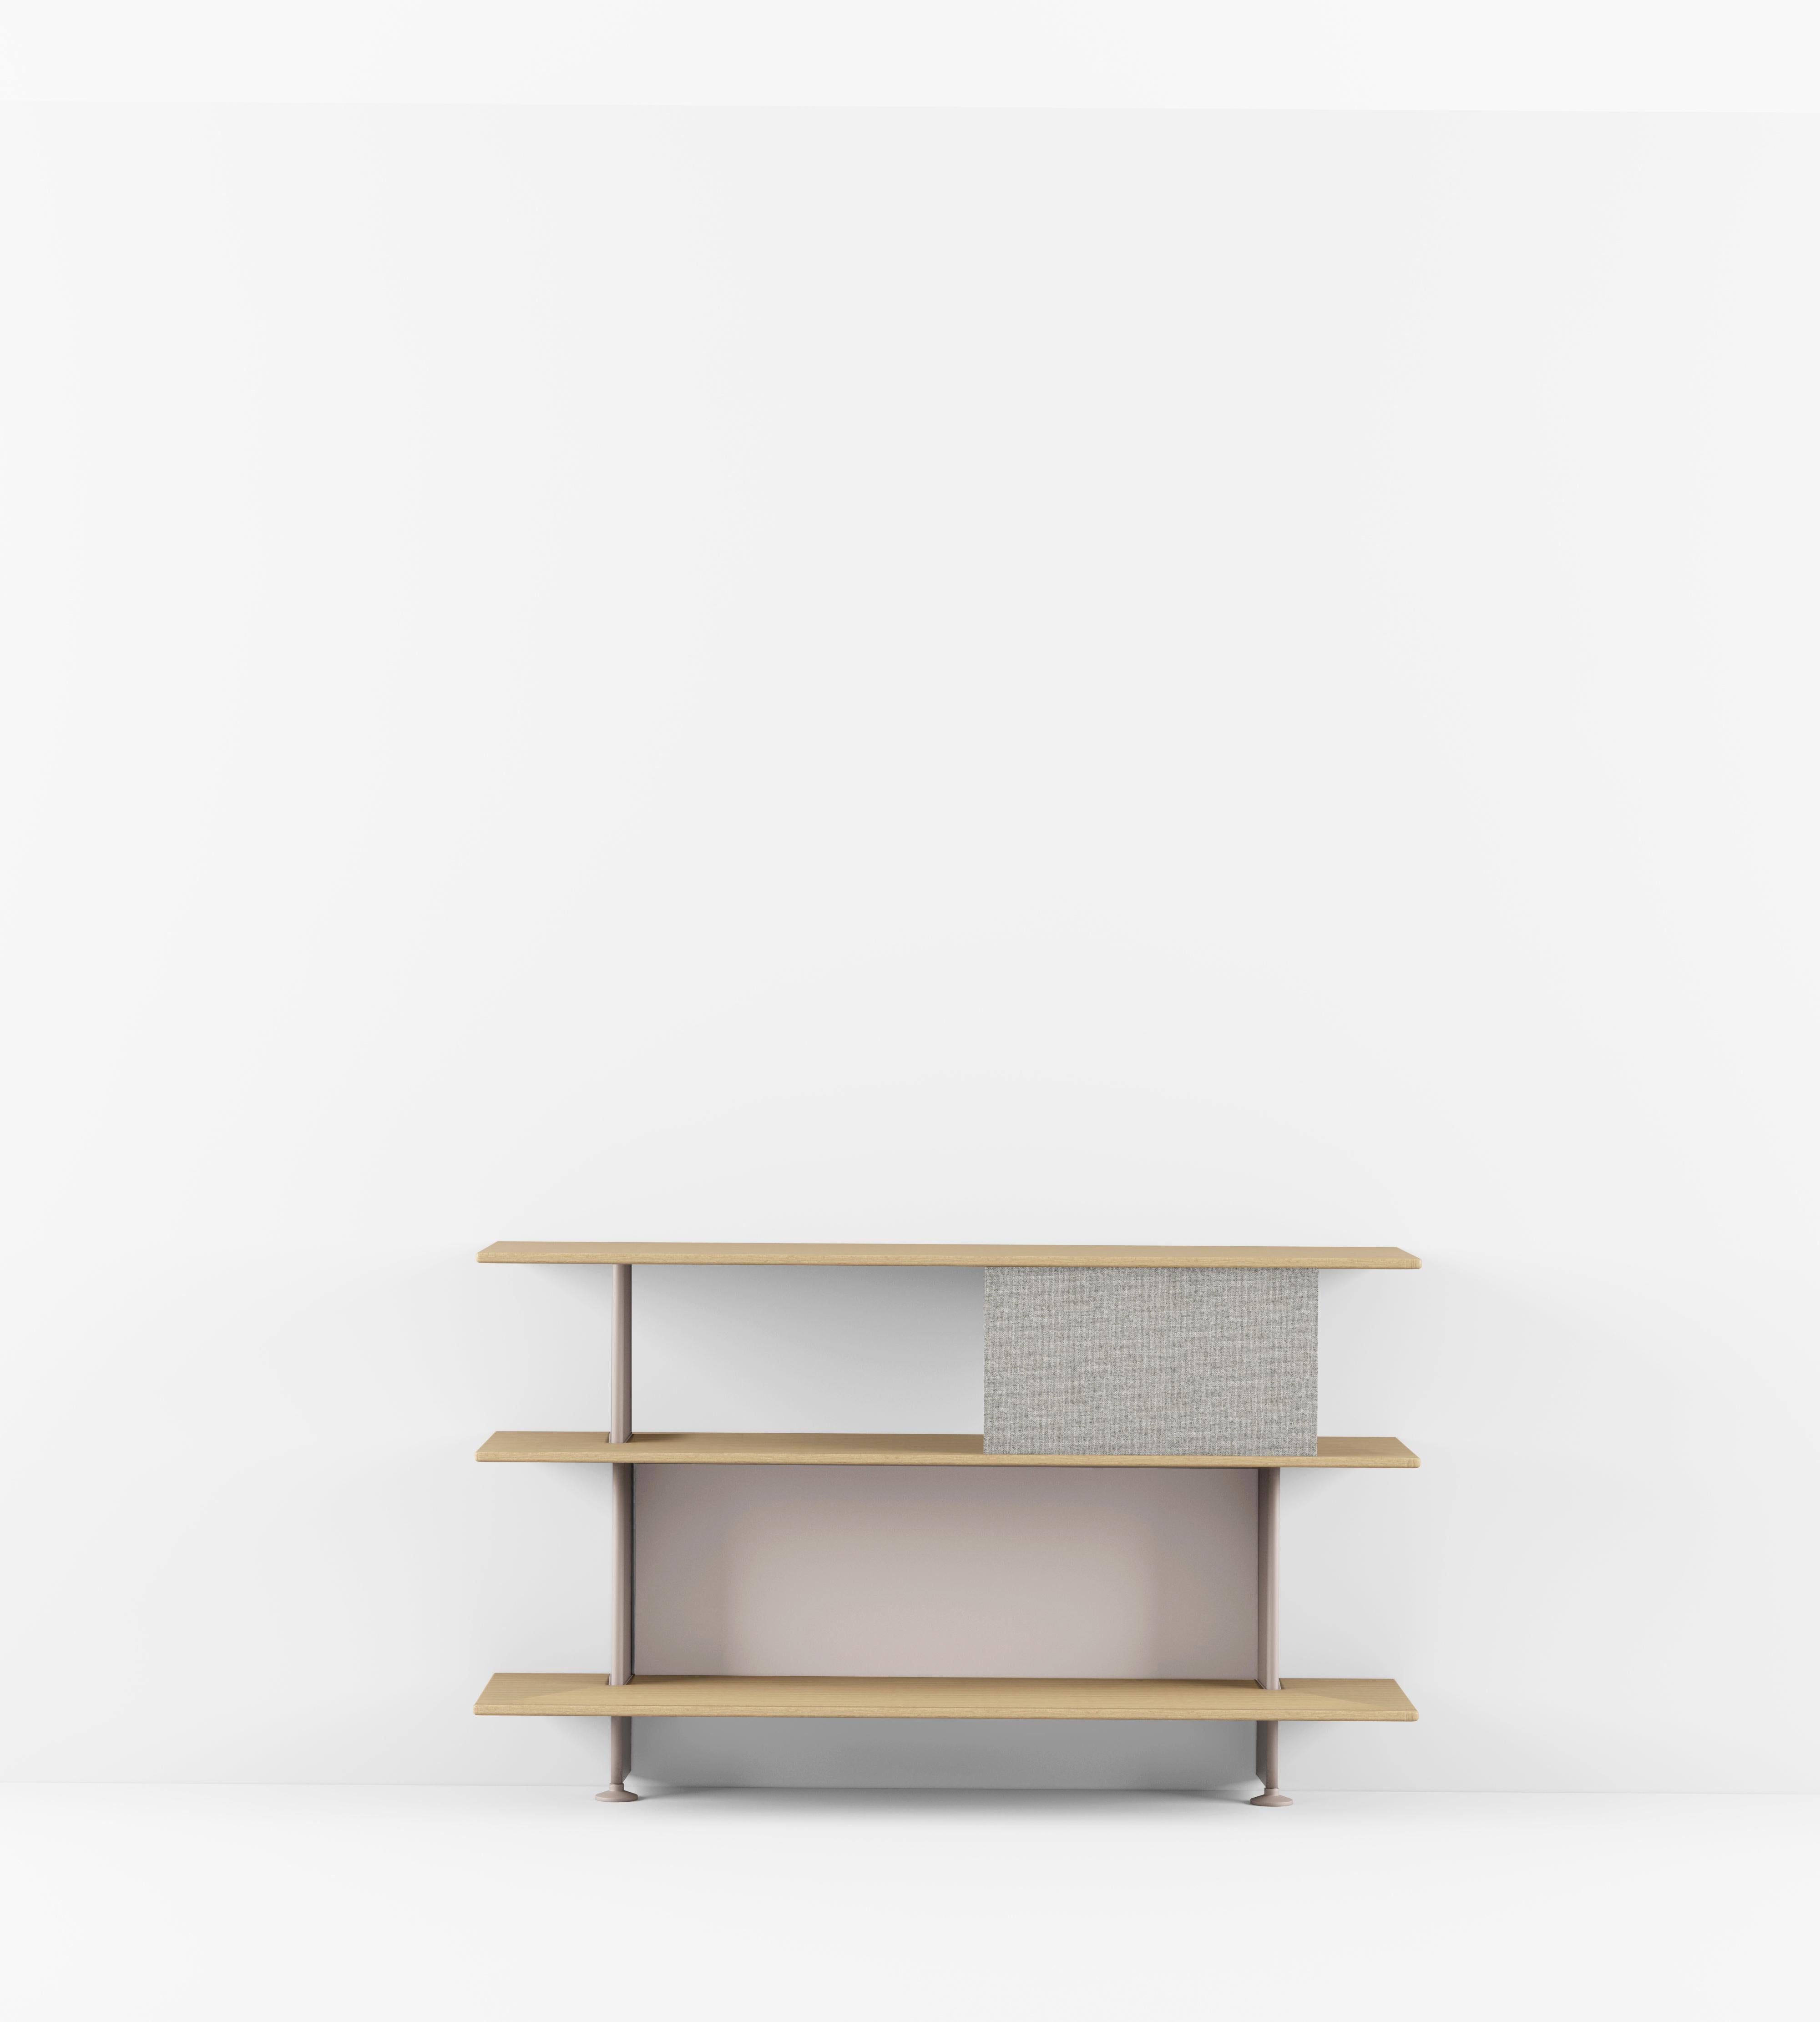 Sideboard with vertical elements in lacquered aluminium and shelves in oak veneered multilayer plywood.
Finish in natural oak wood, lacquered (whitened, Canaletto walnut, dark, ash grey) or coloured stains. Available in two depths: 28 cm or 38